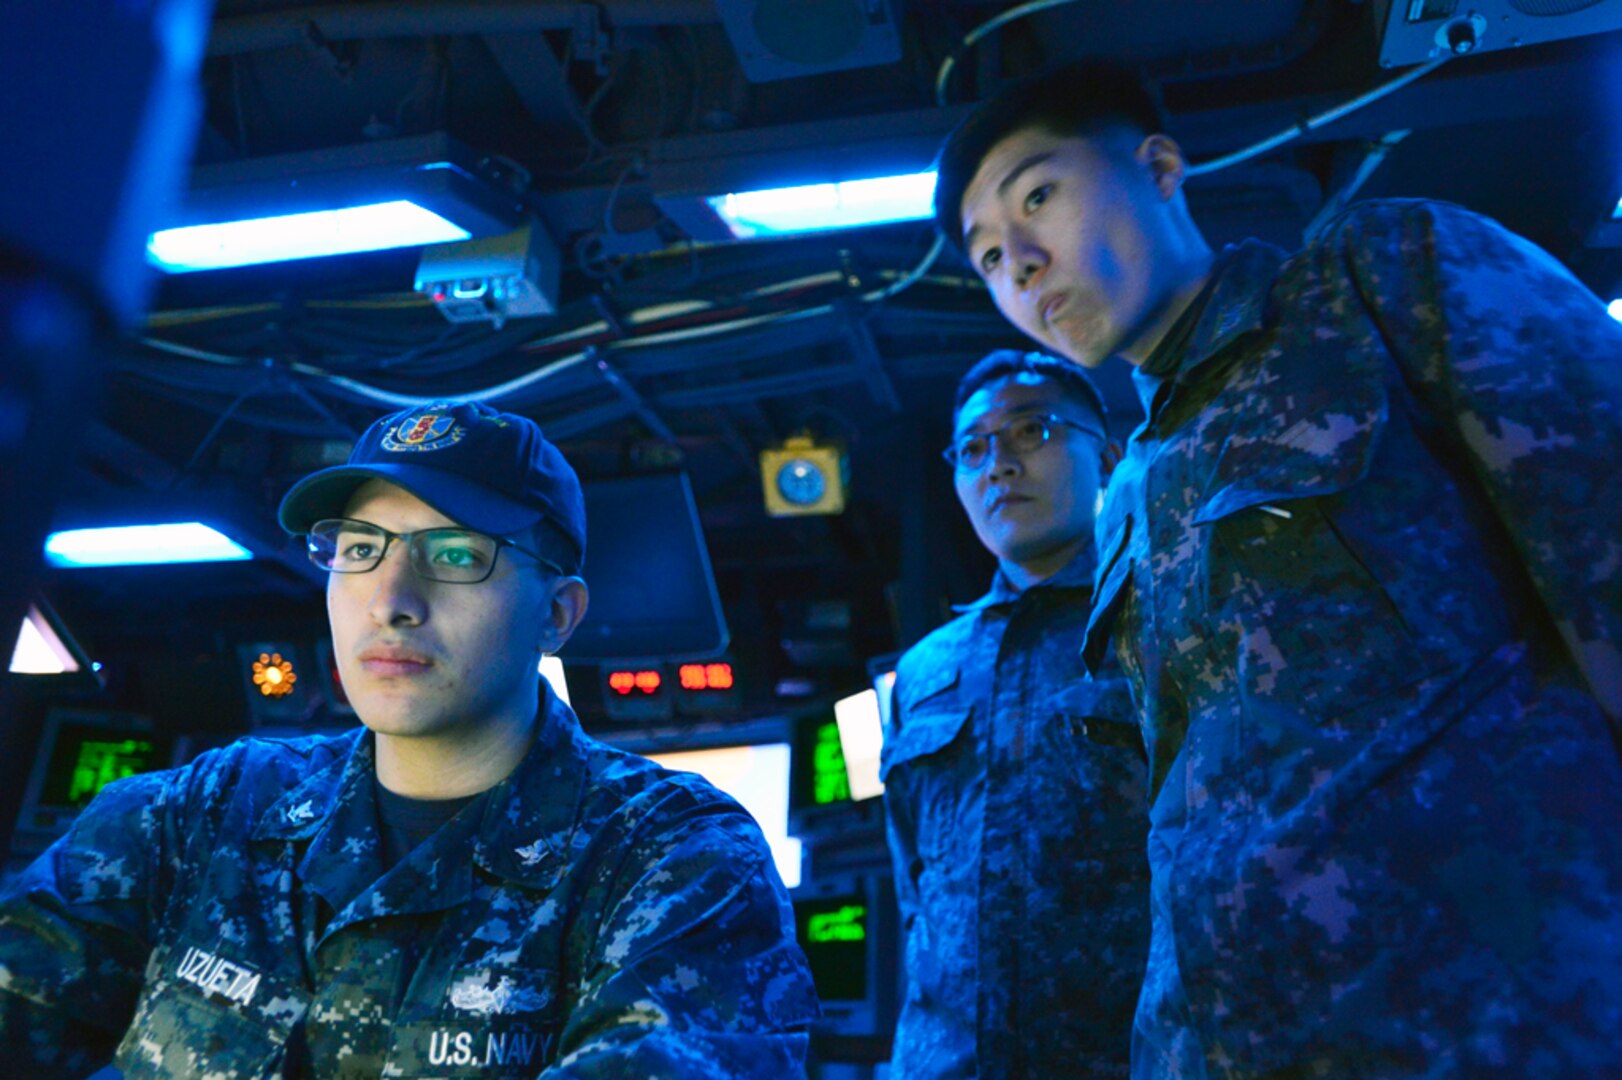 In this file photo, Information Systems Technician 3rd Class Damonique Uzueta monitors operations in Combat Information Control, as Republic of Korea Navy Lt. j.g. Woo Sung Hwa and Chief Petty Officer Lee Moon Hoe observe, while underway aboard the guided-missile destroyer USS John S. McCain (DDG 56) during Exercise Foal Eagle 2015. McCain is on patrol in the 7th Fleet area of responsibility supporting security and stability in the Indo-Asia-Pacific region. Foal Eagle is a series of annual training events that are defense-oriented and designed to increase readiness and maintain stability on the Korean Peninsula while strengthening the ROK-U.S. alliance and promoting regional peace and stability of the Indo-Asia-Pacific region. 